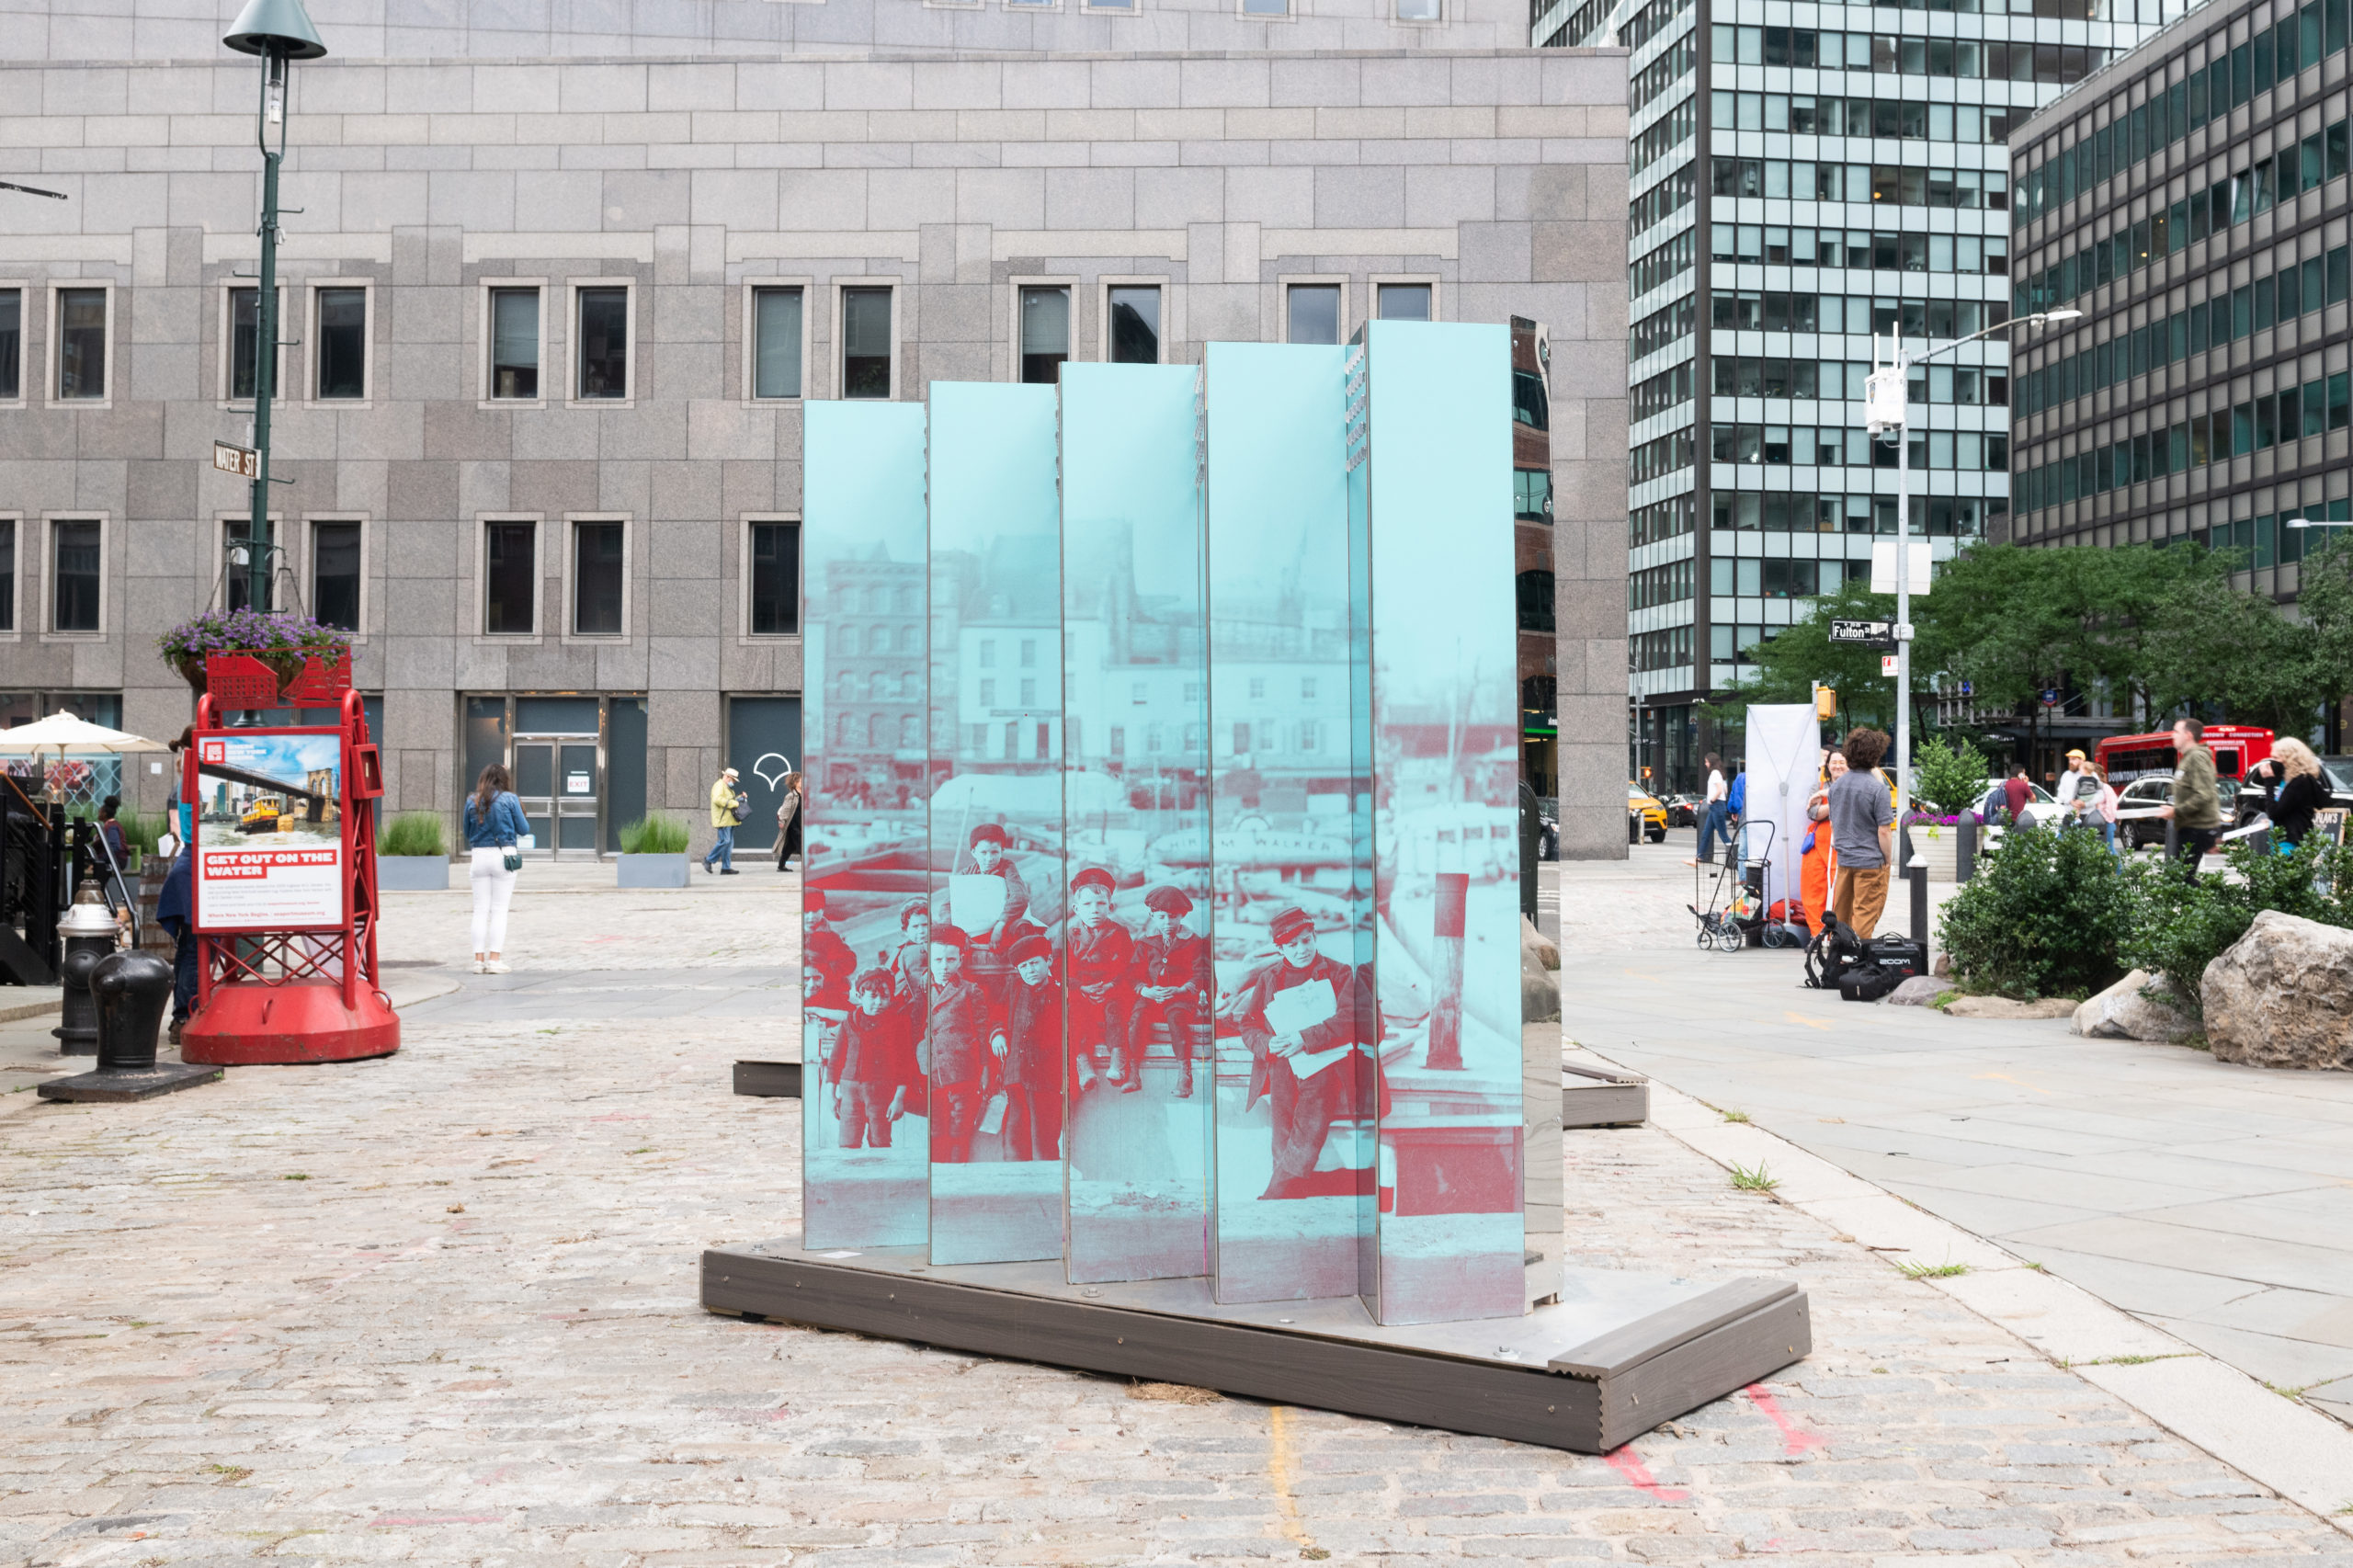 Rose DeSiano, Lenticular Histories: South Street Seaport, photo by Ian Douglas